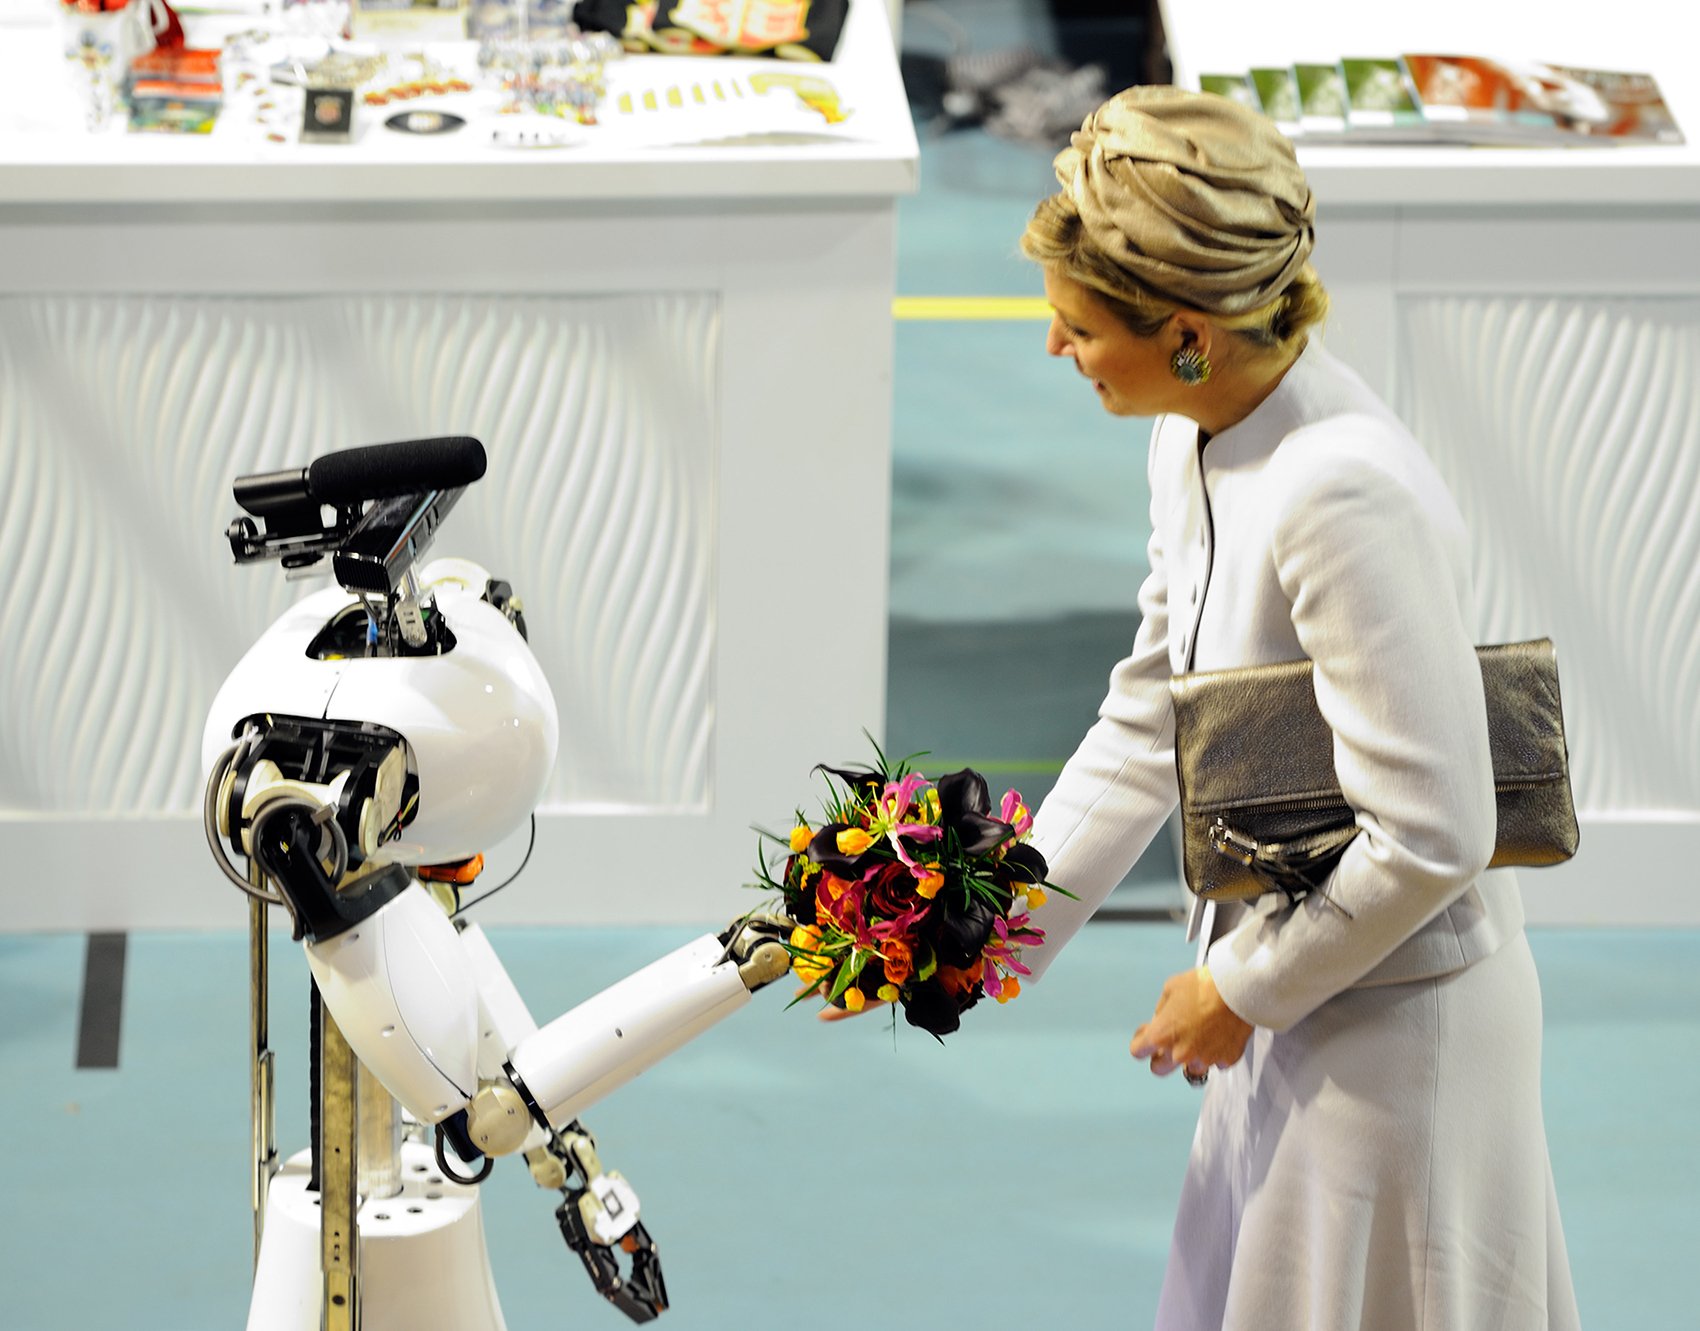 Maxima gets flowers from robot at the RoboCup